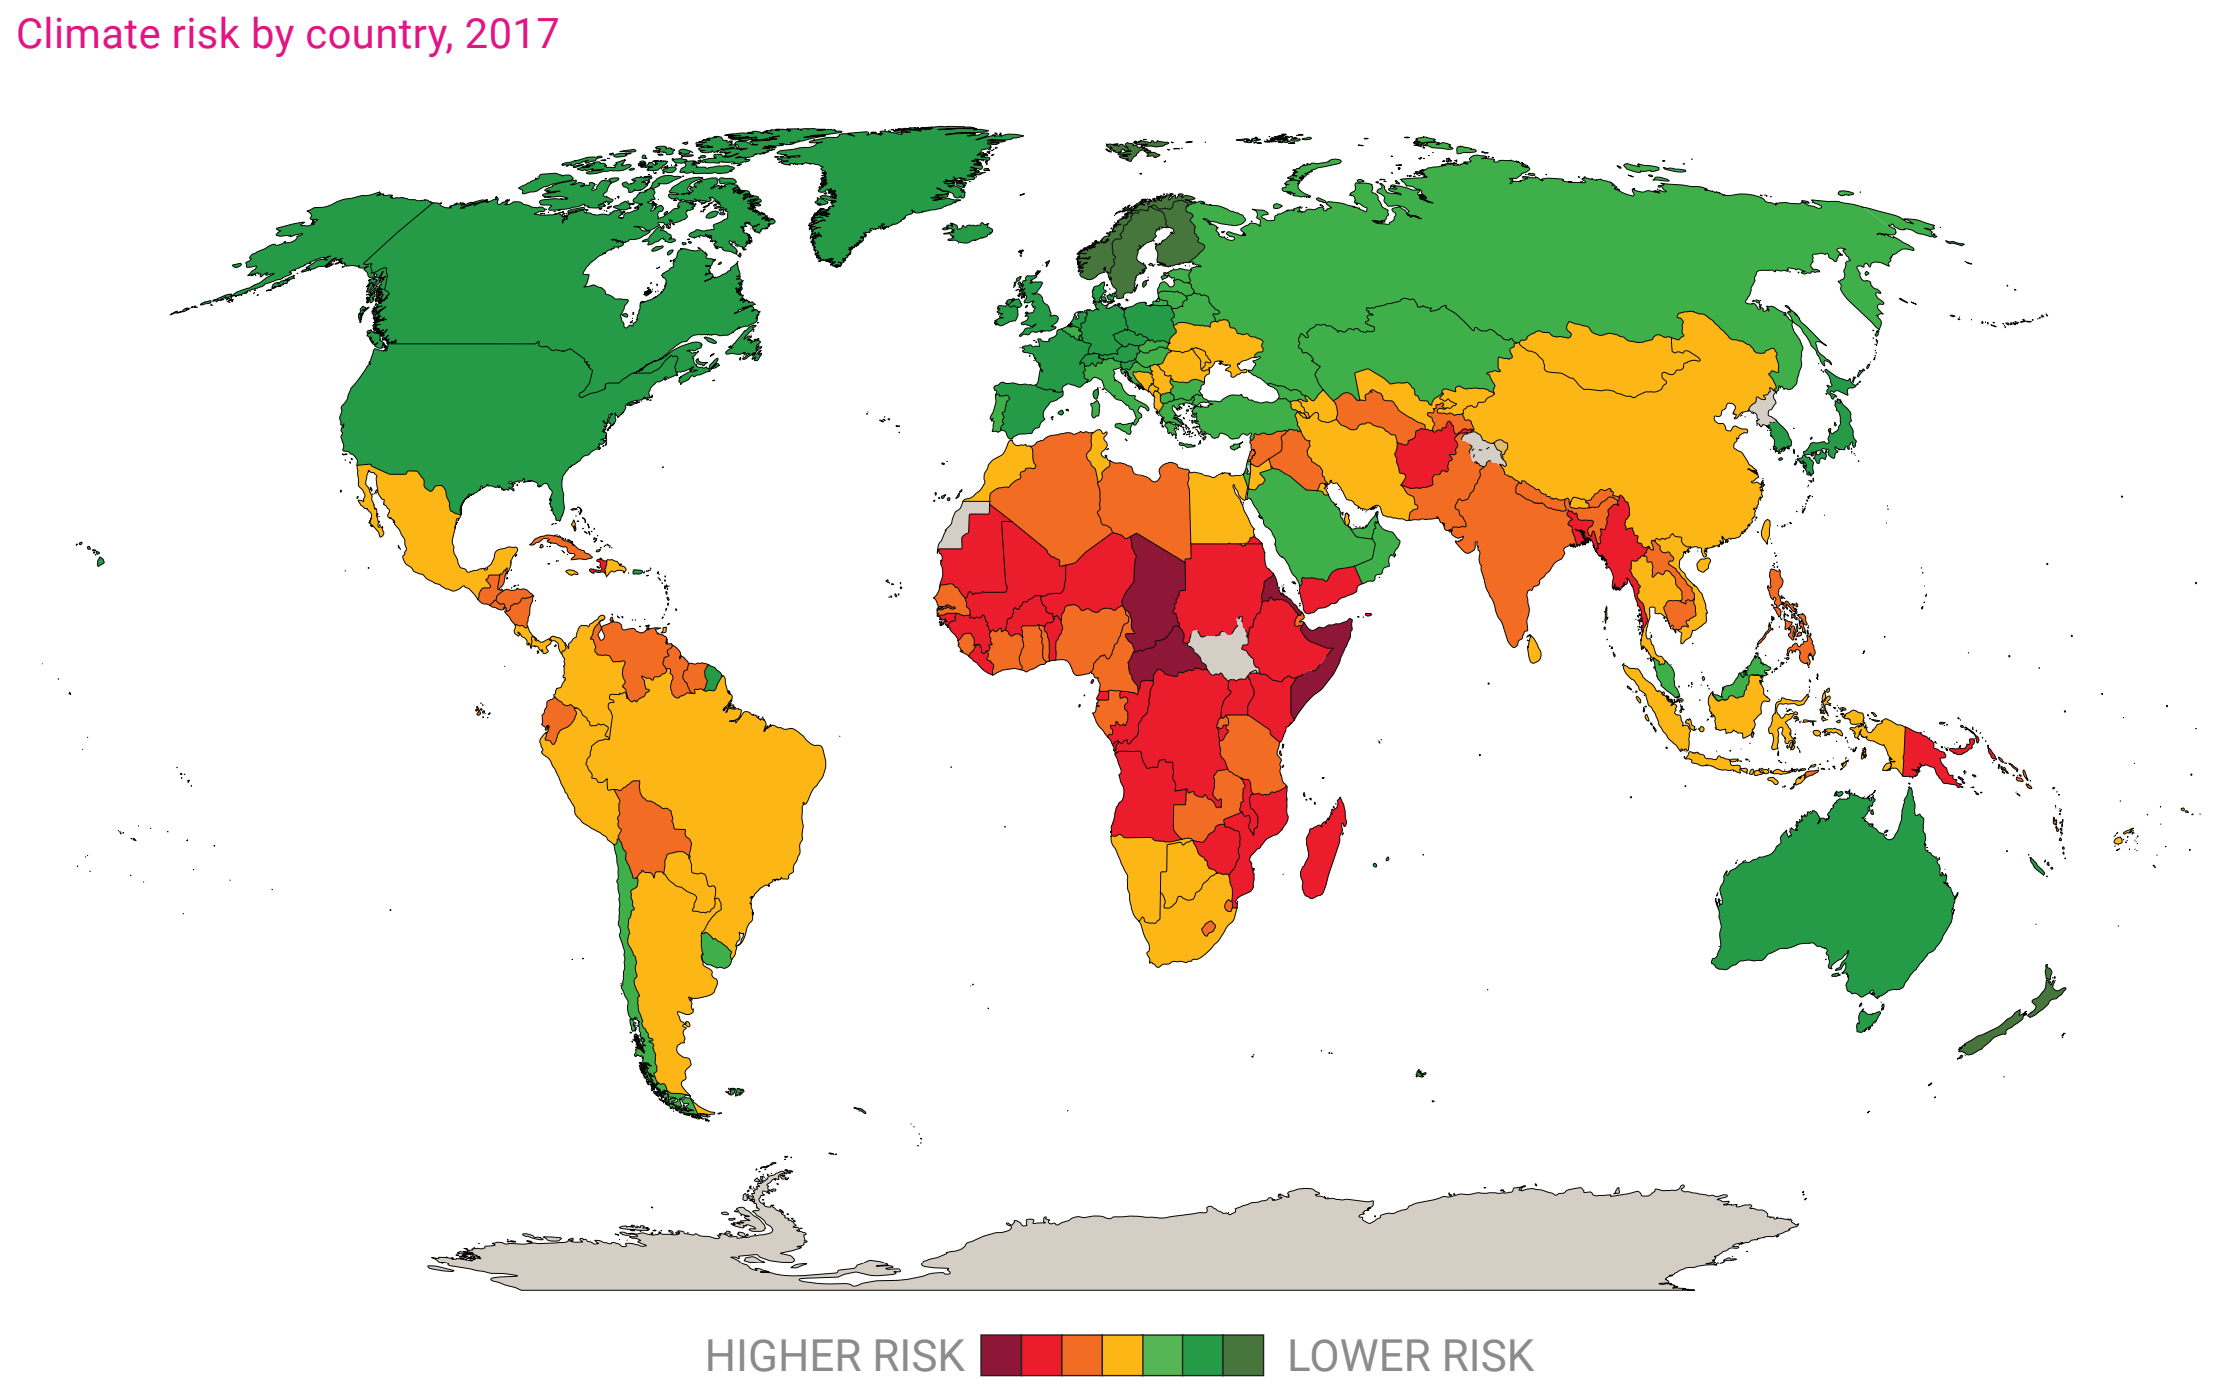 Map showing climate risk by country, 2017. The climate risk of each country is based on its ND-GAIN Index score for 2017. The ND-GAIN Index is a composite measure, with a range of 0-100, of a country’s vulnerability to climate change and its readiness to improve resilience. Vulnerability is quantified by the level of exposure, sensitivity and adaptive capacity of six life-supporting sectors (food, water, health, ecosystem services, human habitat and infrastructure). Readiness measures a country’s ability to realize adaptive actions in the economic, governance and social spheres. Data: University of Notre Dame Global Adaptation Initiative Index (available at https://gain.nd.edu/). Graphic: UNDESA